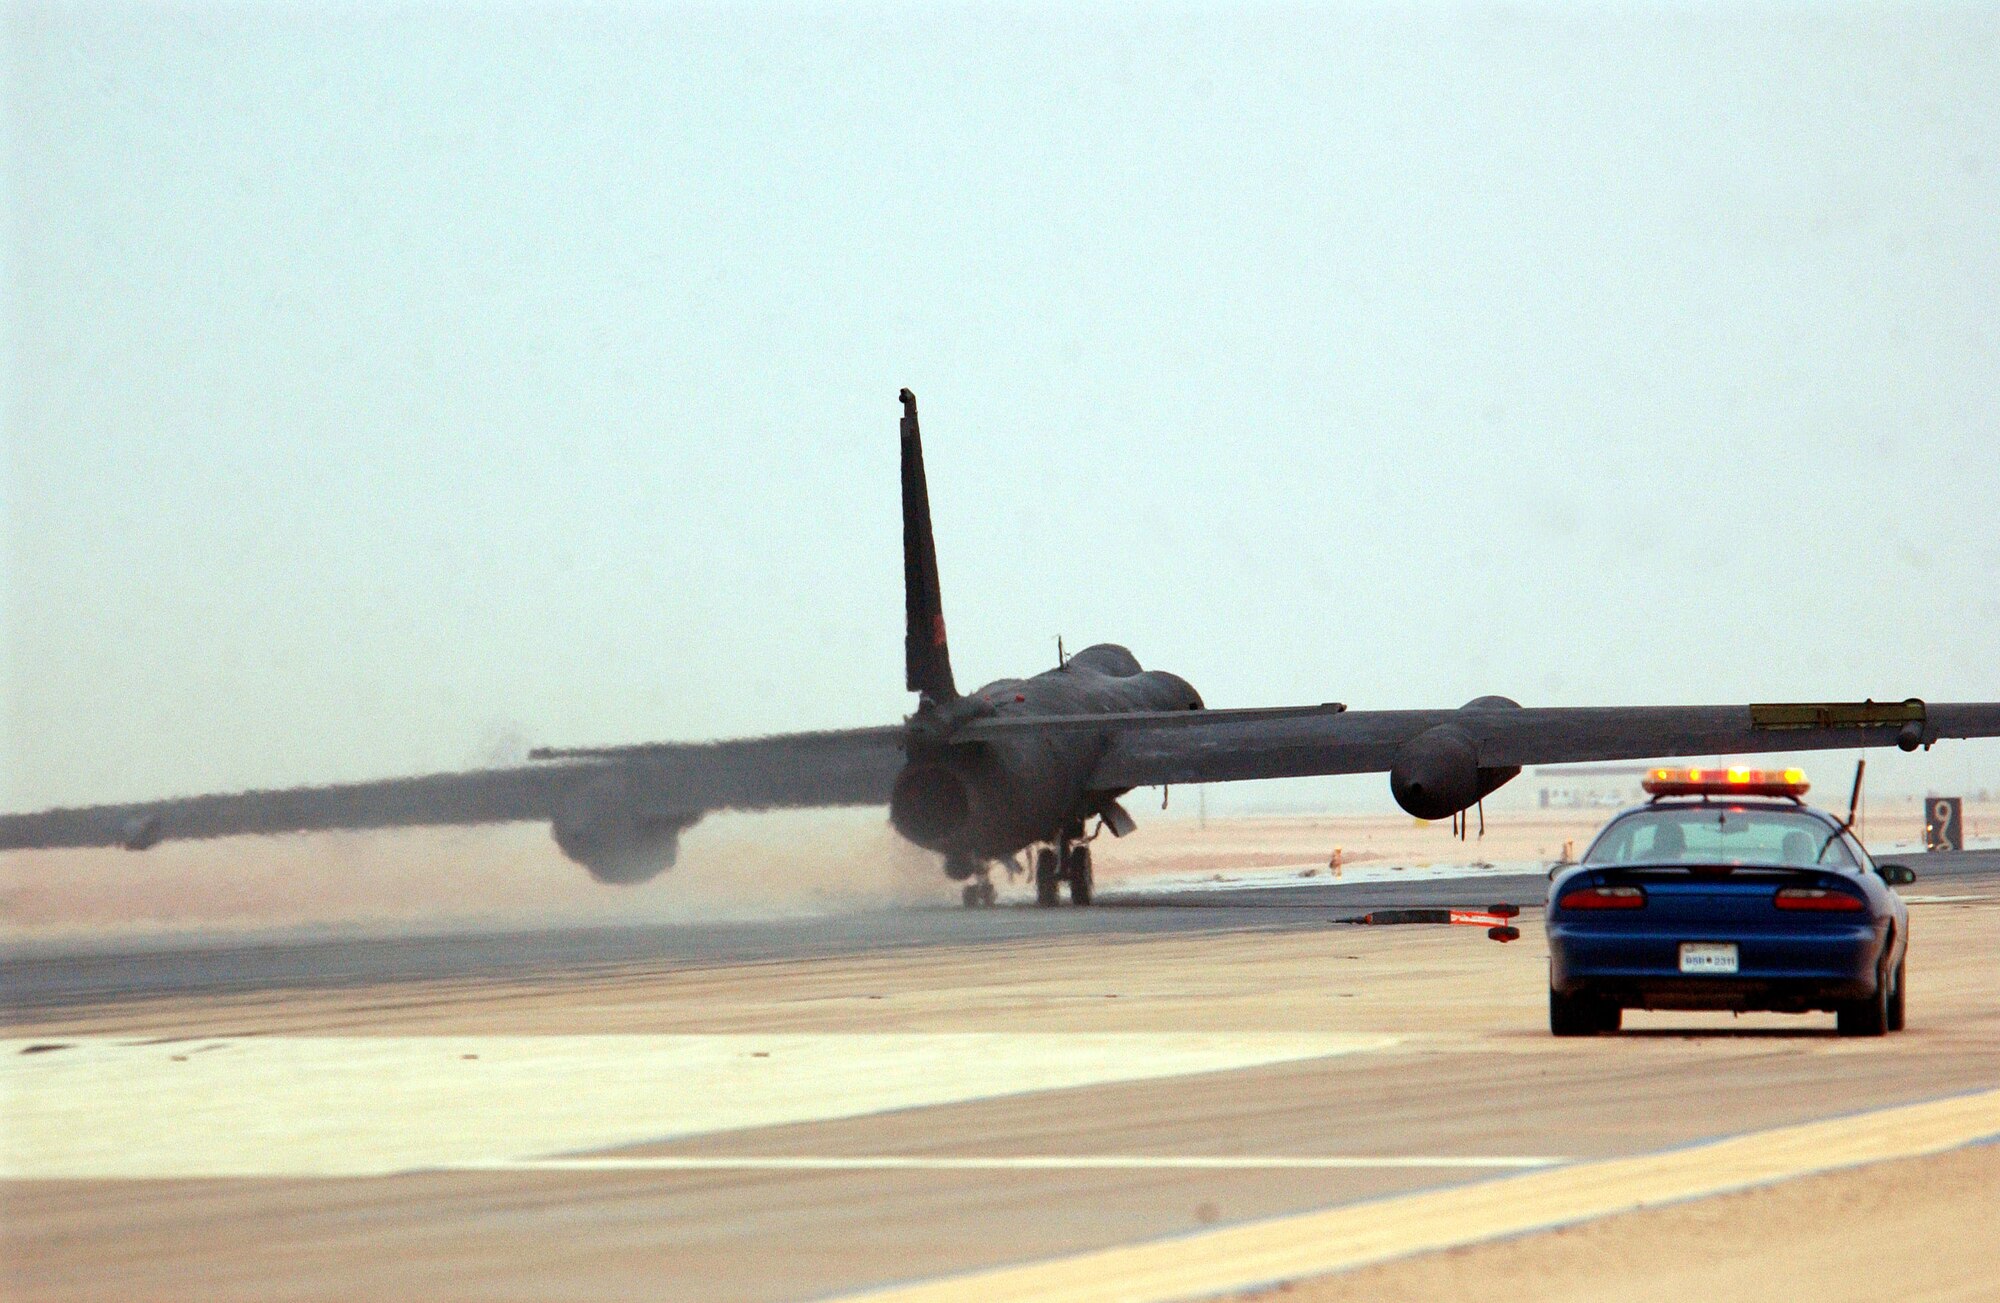 OPERATION IRAQI FREEDOM -- Capt. Don Yu, a U-2 Dragon Lady pilot deployed from the 99th Reconnaissance Squadron, Beale Air Force Base, Calif., to the 363rd Expeditionary Reconnaissance Squadron, takes off for a mission on April 11.  The U-2 is a high altitude-multi intelligence reconnaissance aircraft.  It can fly above 70,000 ft and provides near-real-time imagery and signals intelligence to war fighters and national authorities in support of Operation Iraqi Freedom. (U.S. Air Force photo by Staff Sgt. Matthew Hannen)